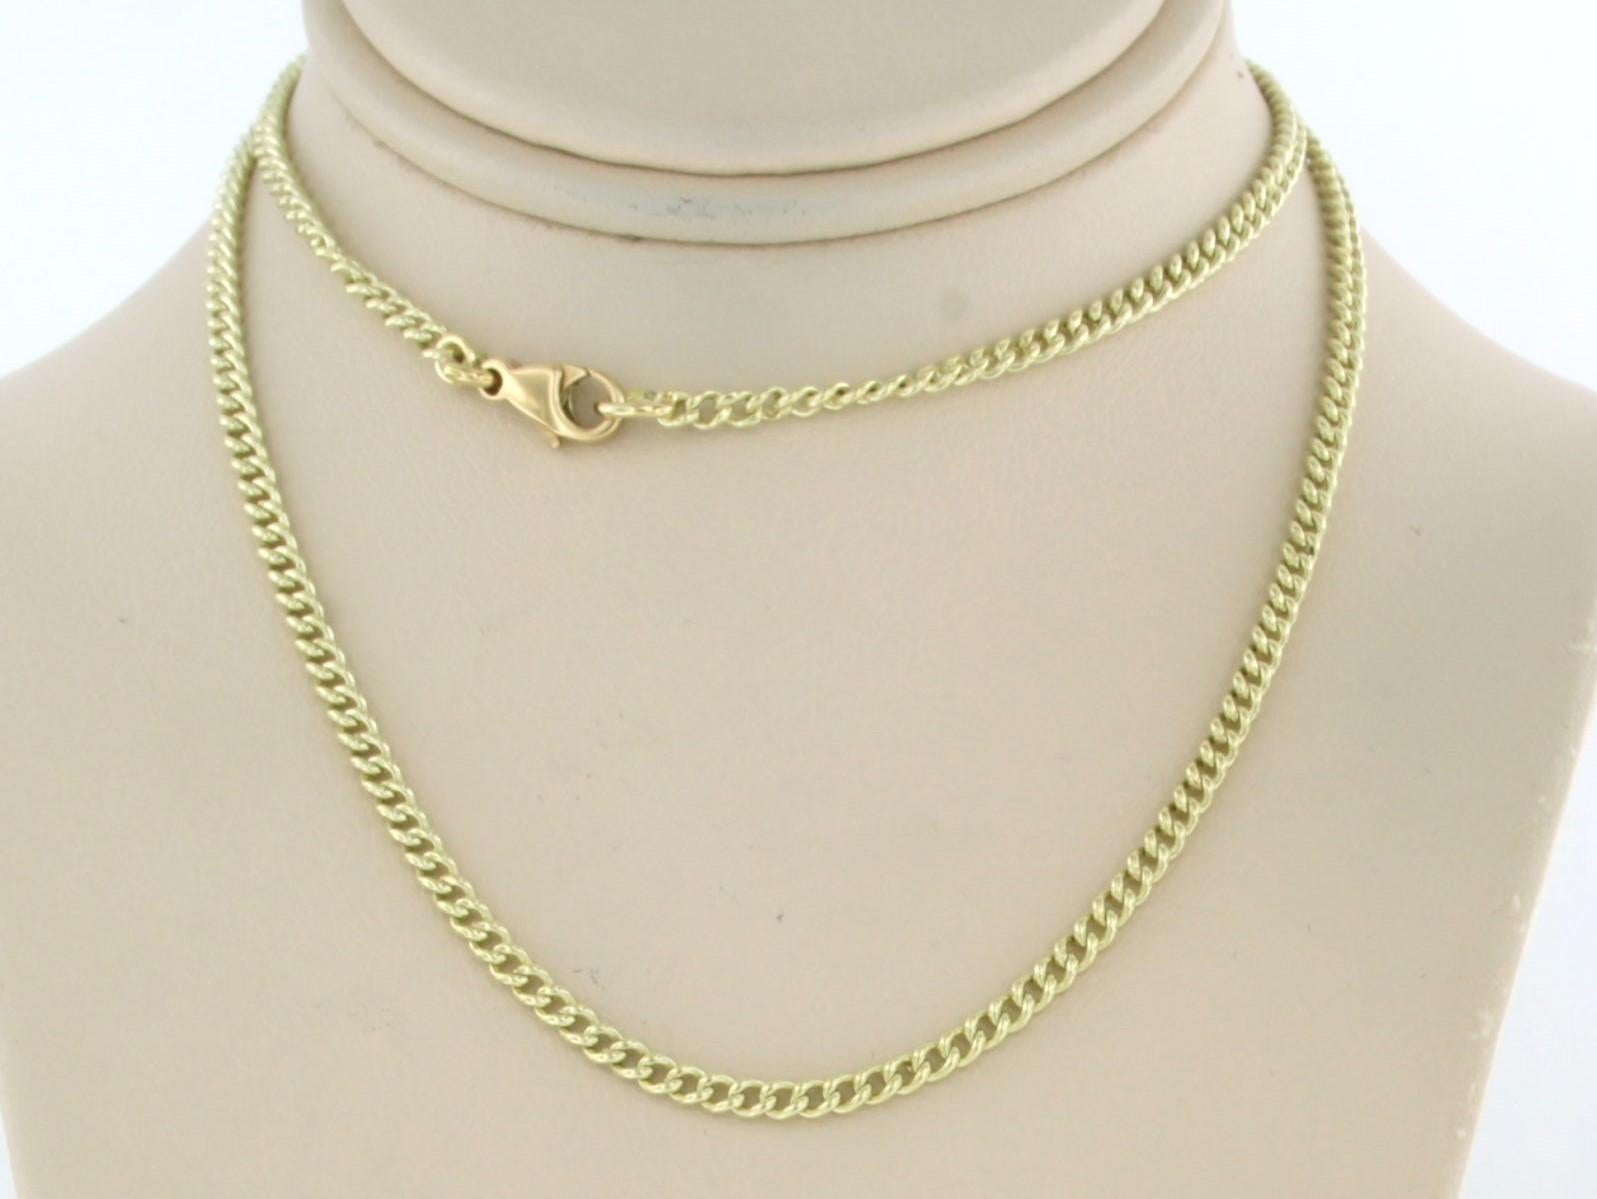 14k yellow gold necklace - 45 cm long

detailed description

the necklace is 45 cm long and 2.3 mm wide

total weight 8.7 grams

the necklace is in good condition

hallmark present, guaranteed 14k gold
b15655